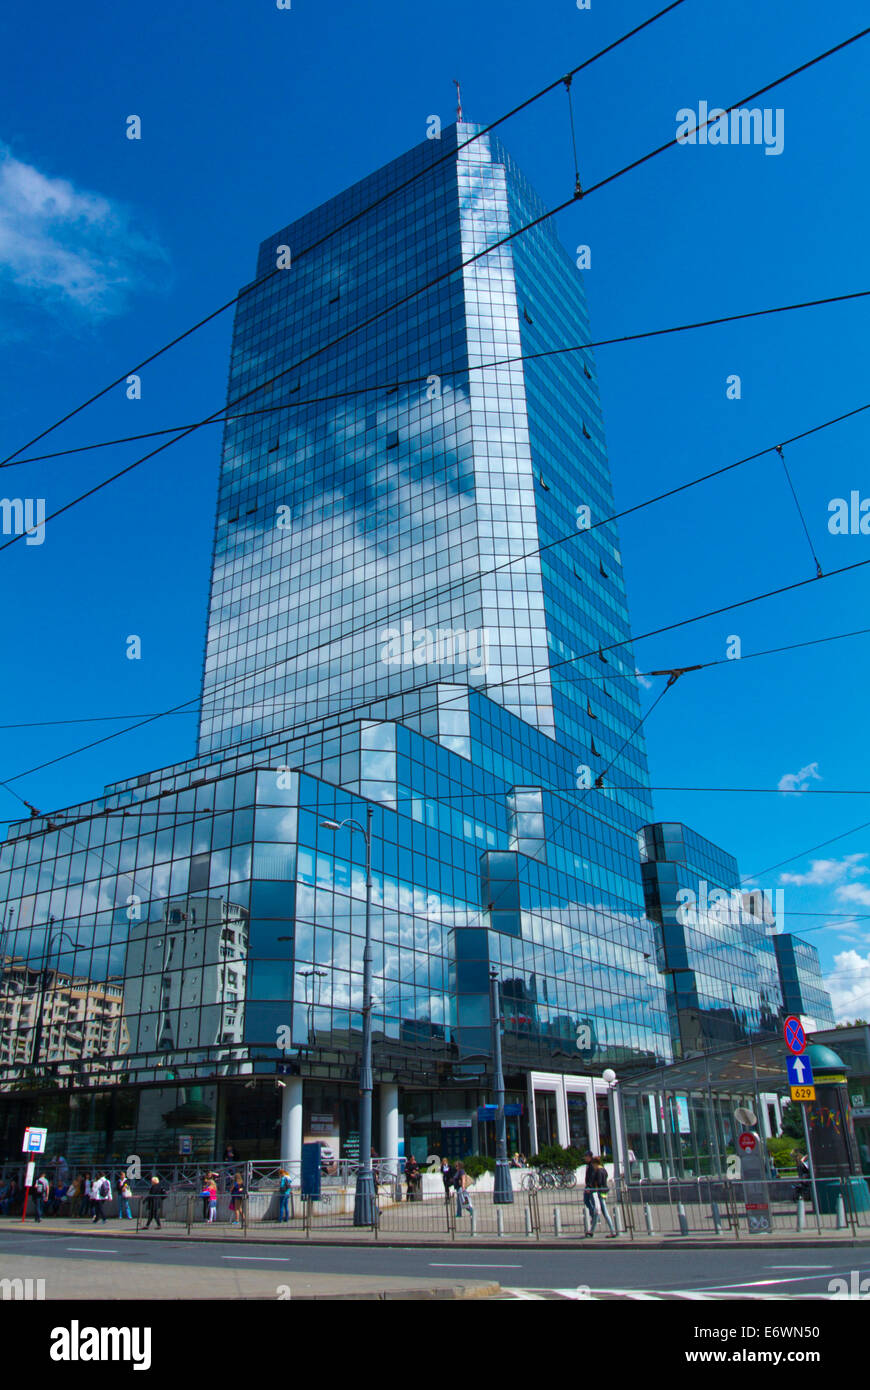 The Blue Skyscraper, Plac Bankowy square, central Warsaw, Poland, Europe Stock Photo